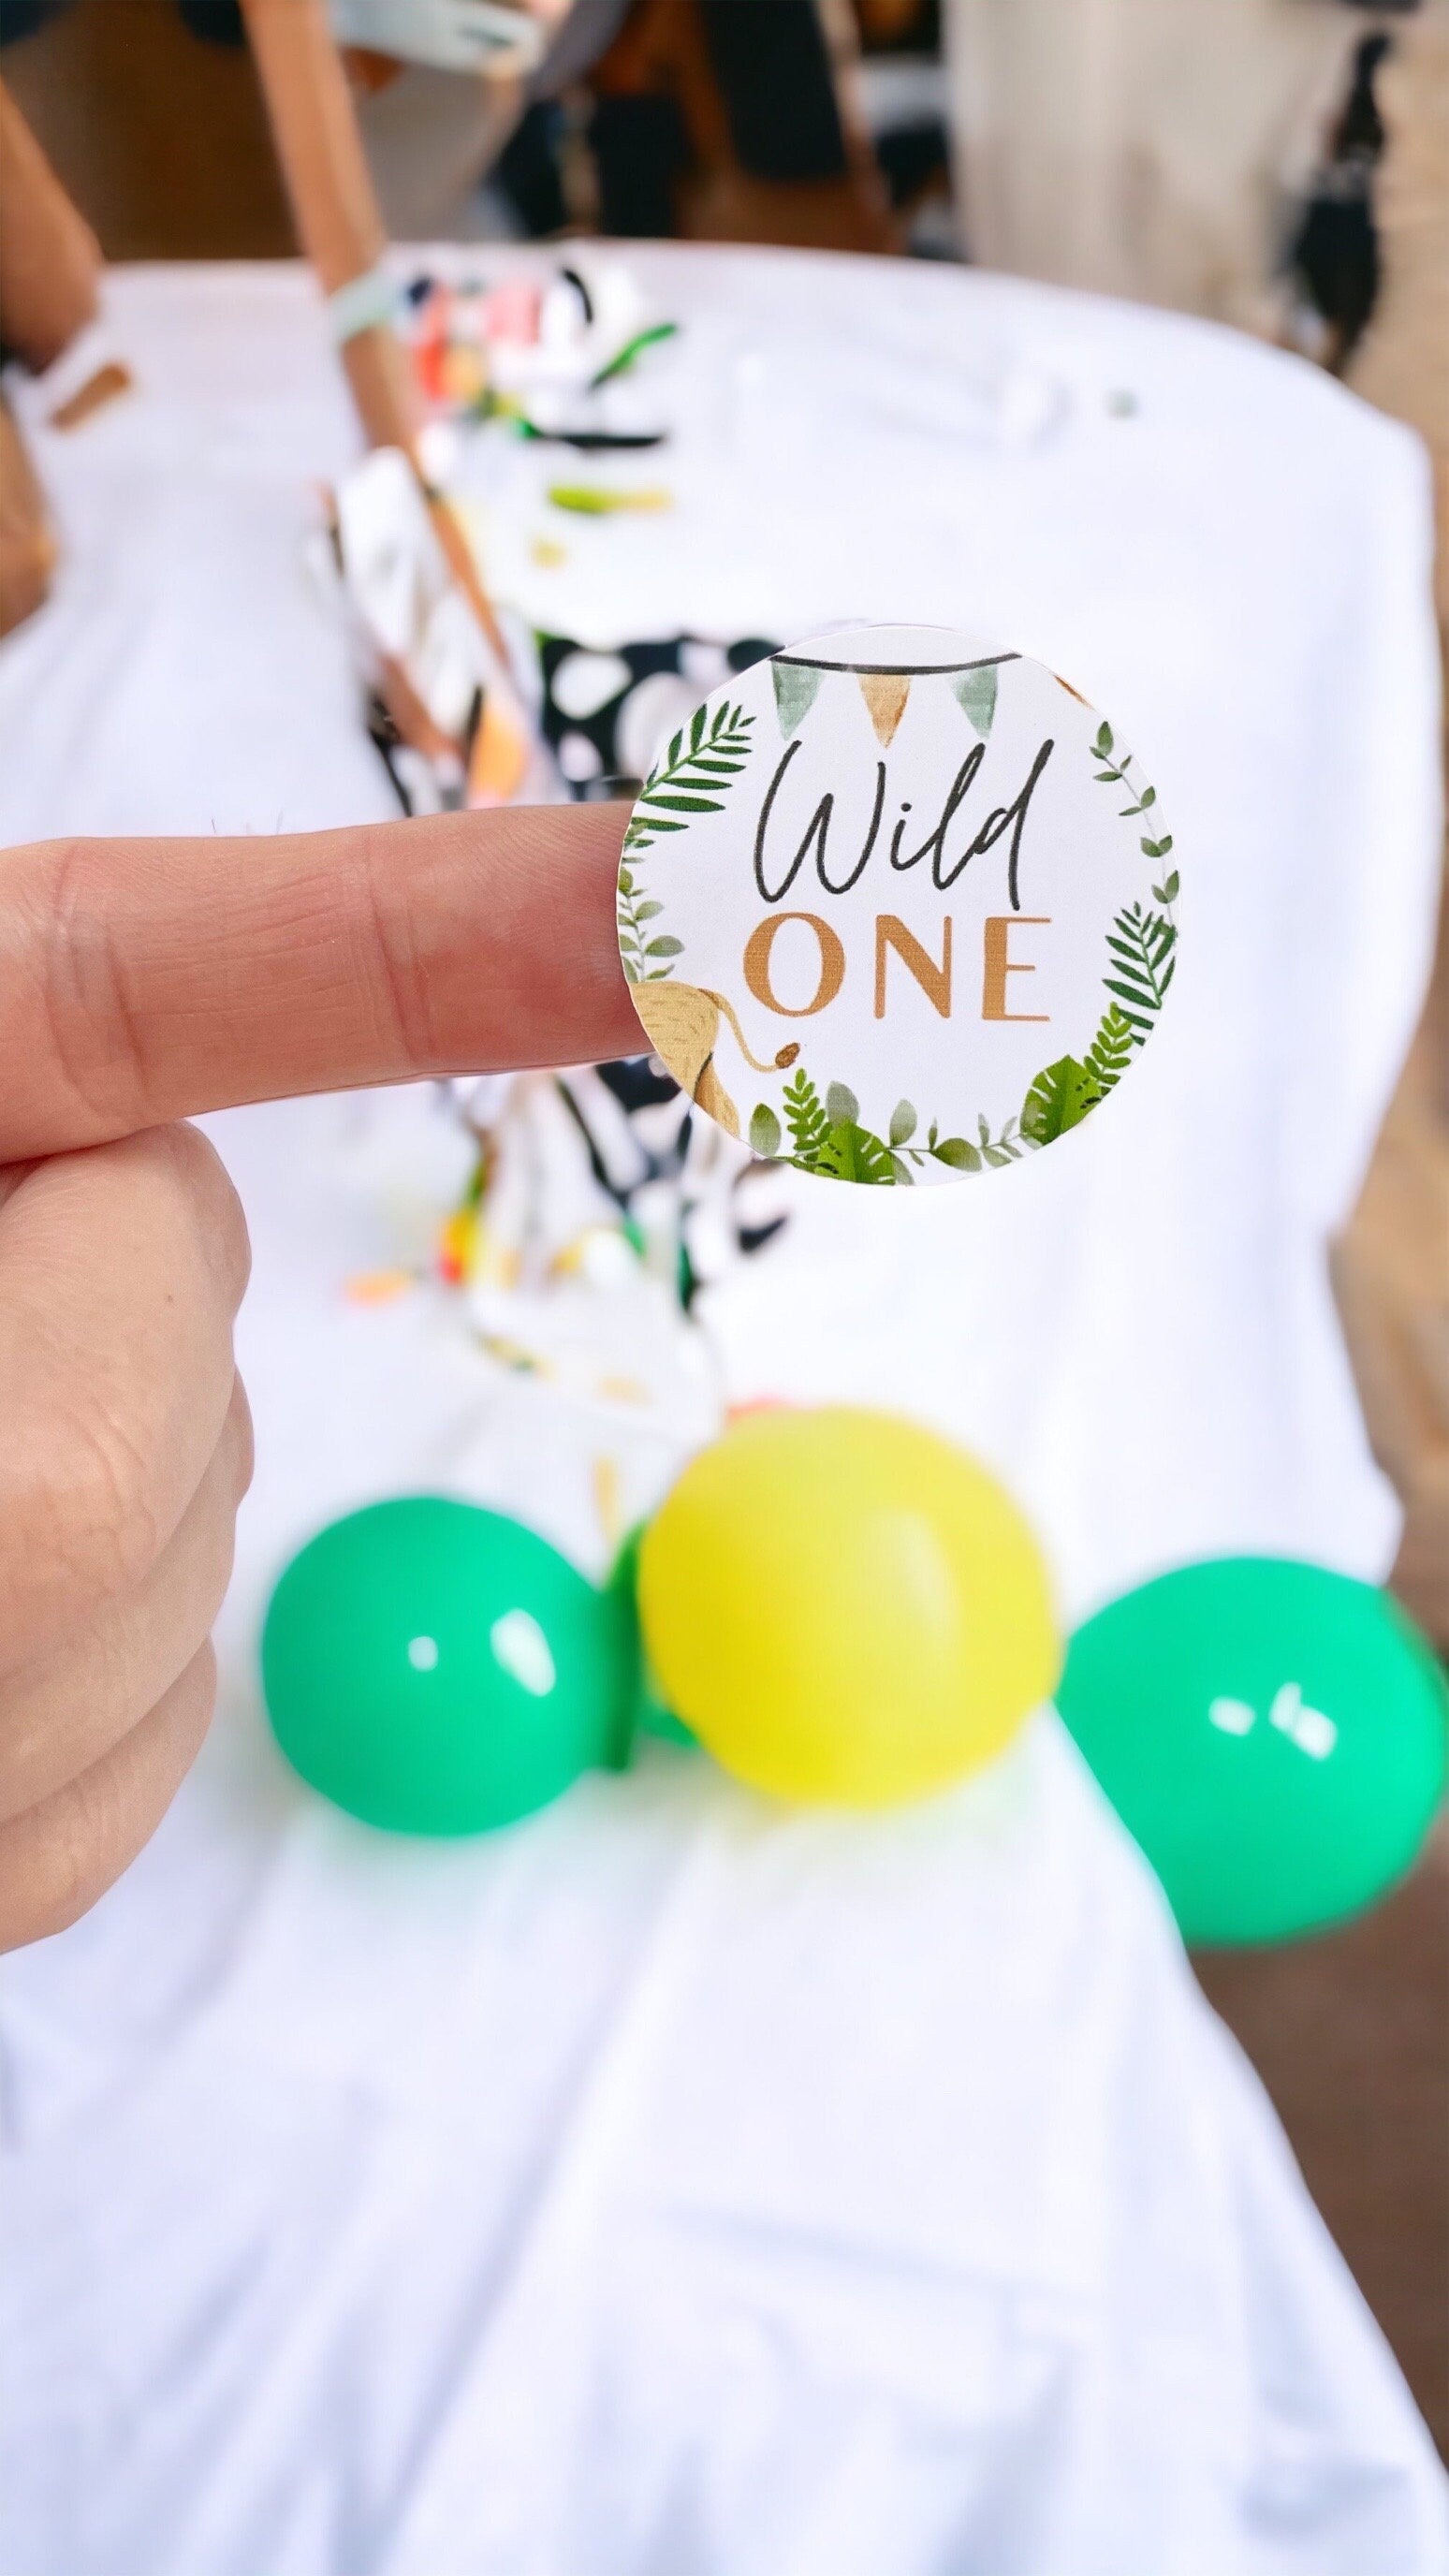 Wild One Safari sticker | 1st Birthday Party Gratitude Stickers | Thank You Labels | Packaging Stickers | Kids Thank You | Packaging Labels